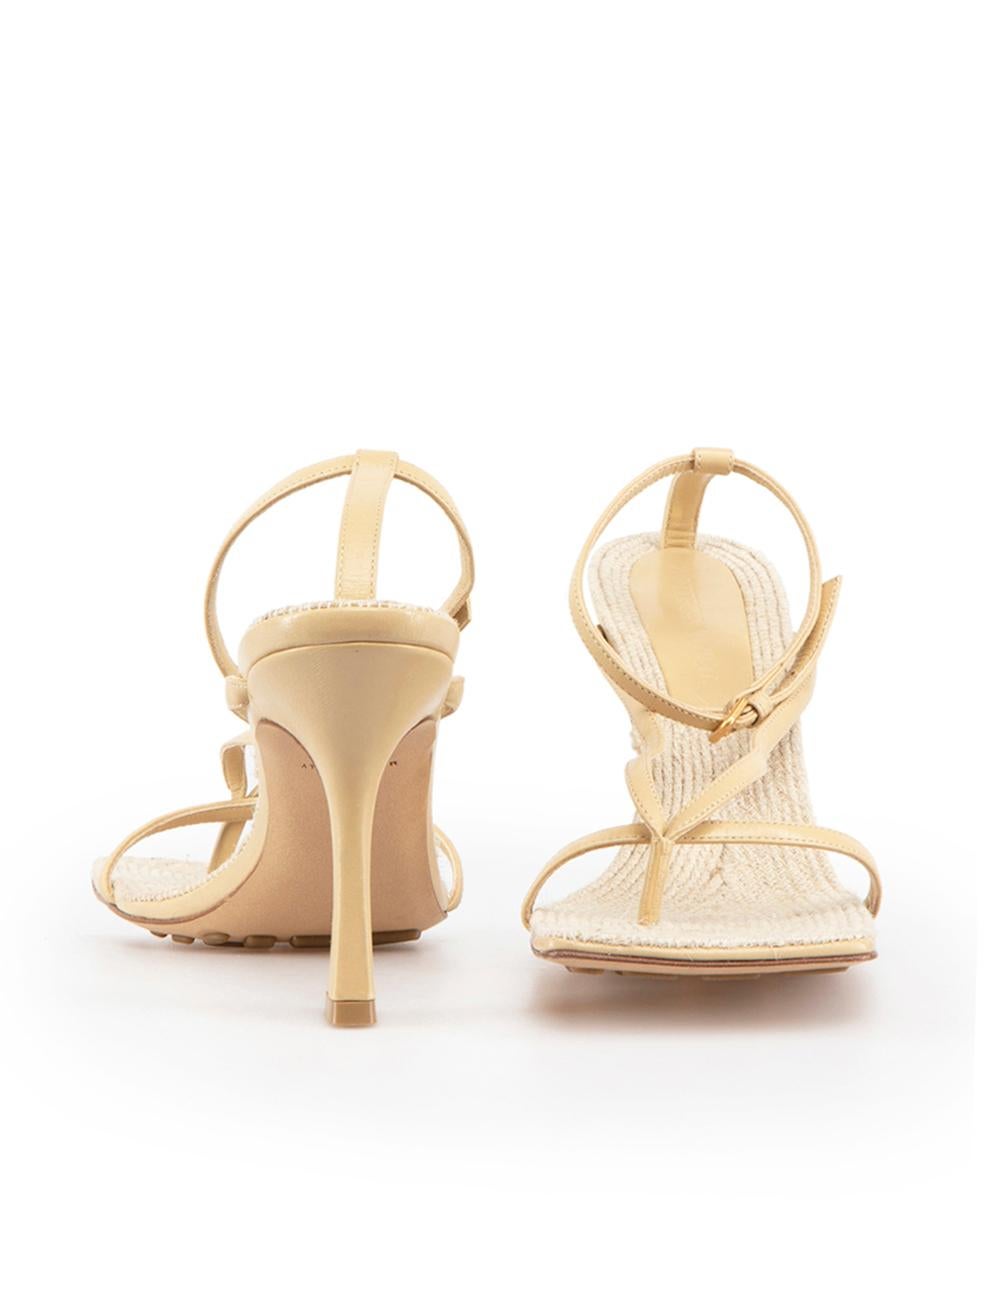 Bottega Veneta Beige Leather Heeled Thong Sandals Size IT 37 In Good Condition For Sale In London, GB